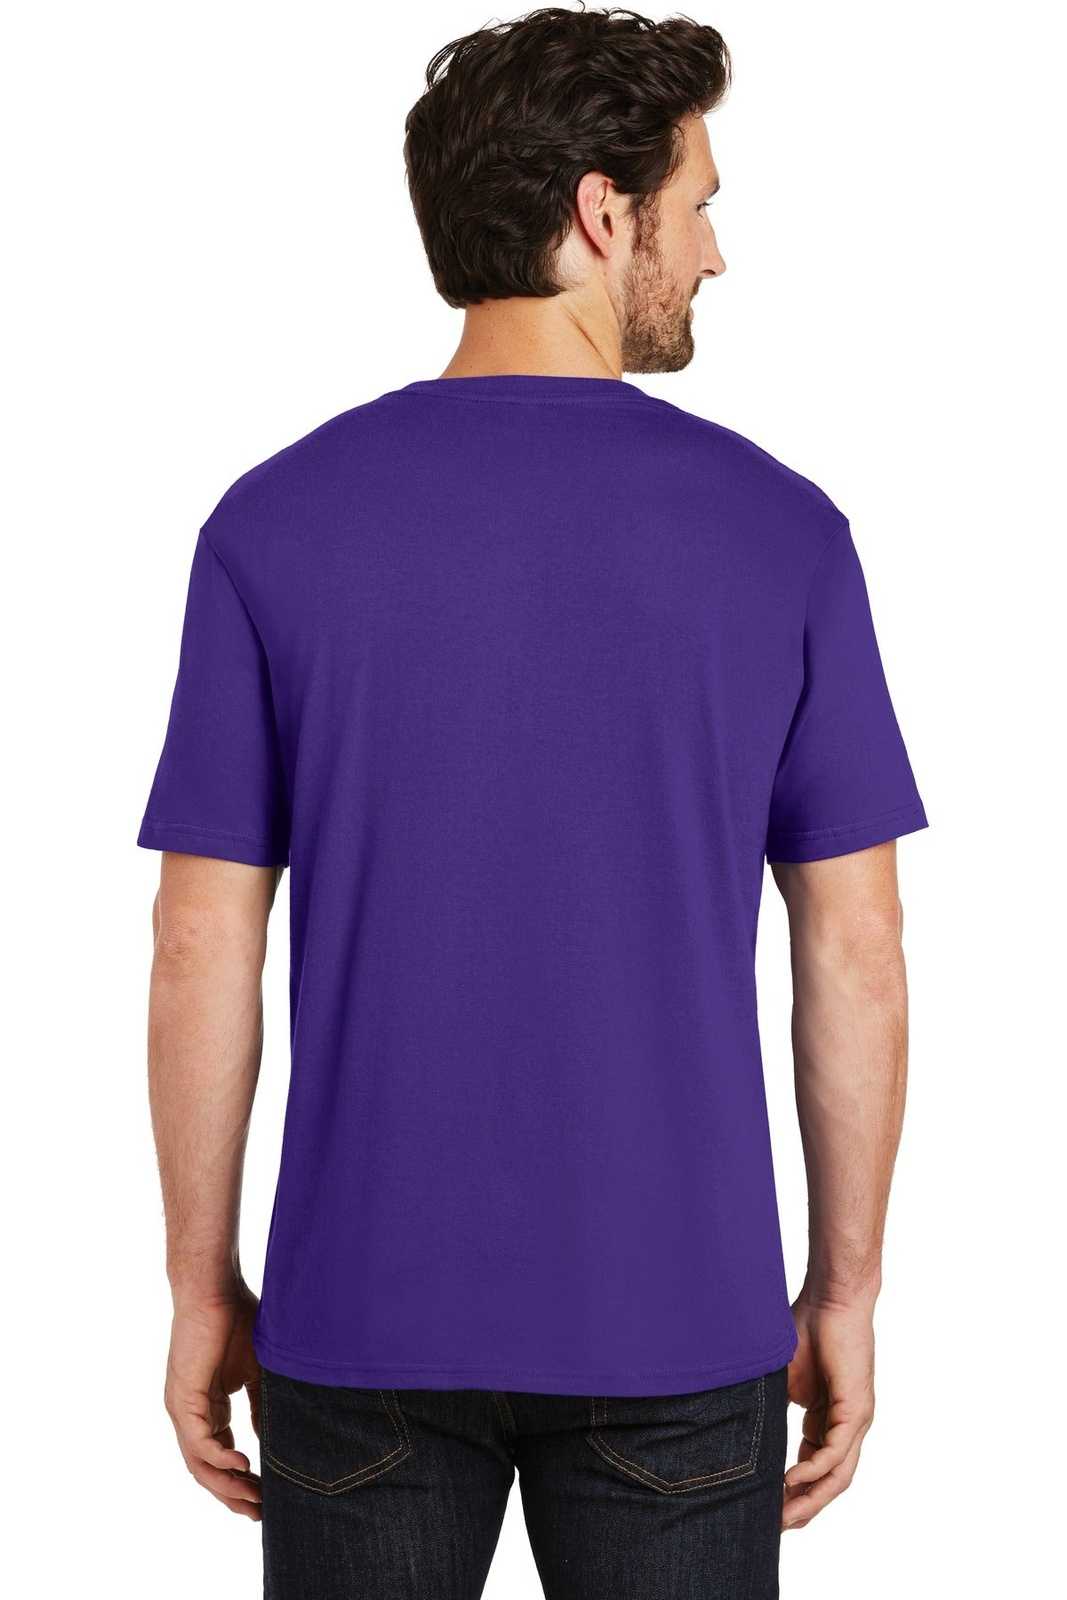 District DT104 Perfect Weight Tee - Purple - HIT a Double - 2